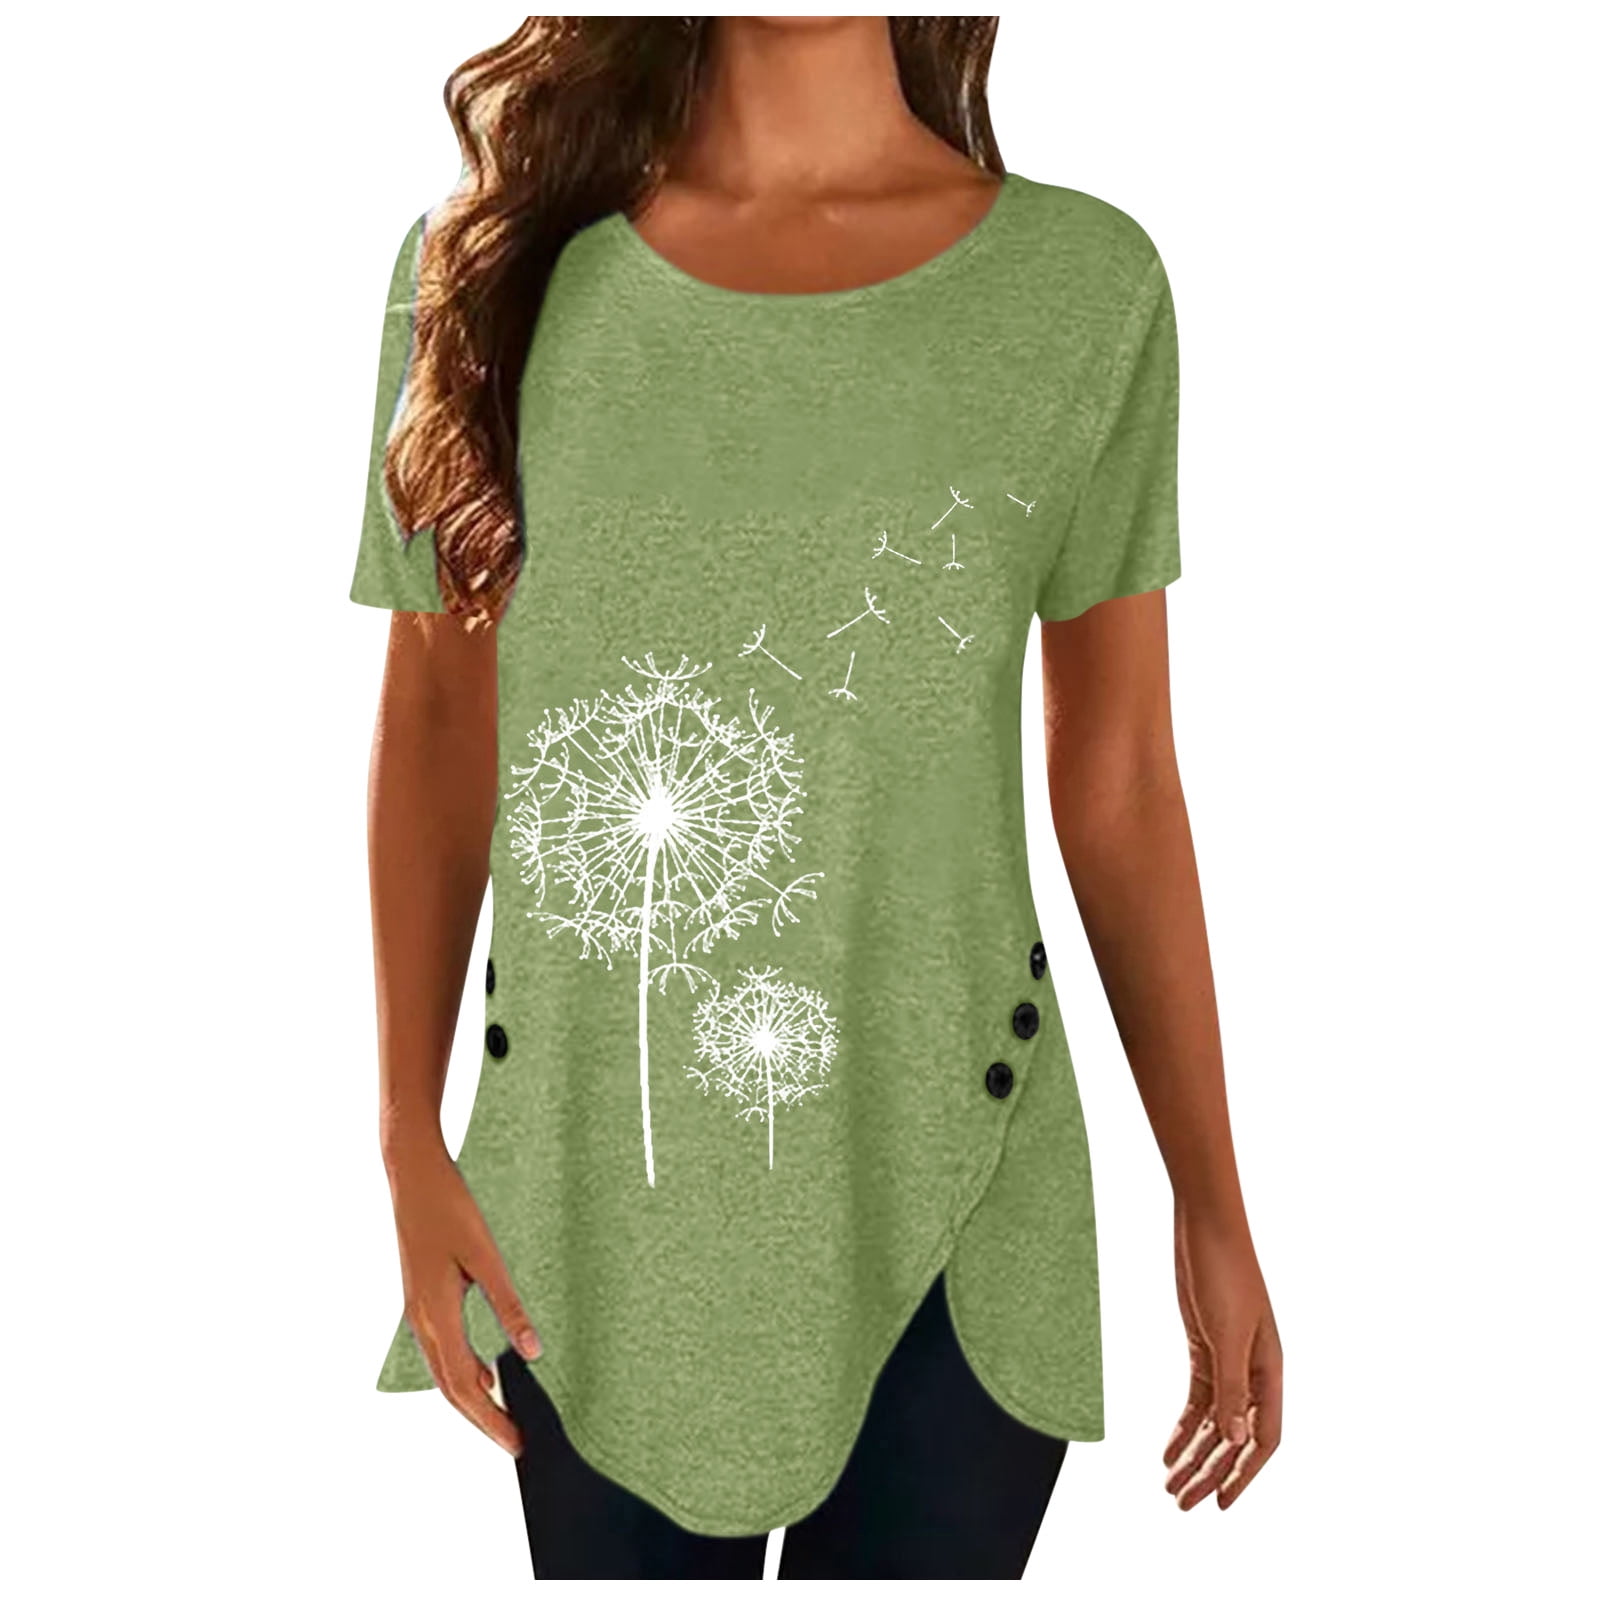 Dandelion Print Shirt for Womens Short Sleeve Blouse Round Collar Tshirts Loose Casual Fit Tops 